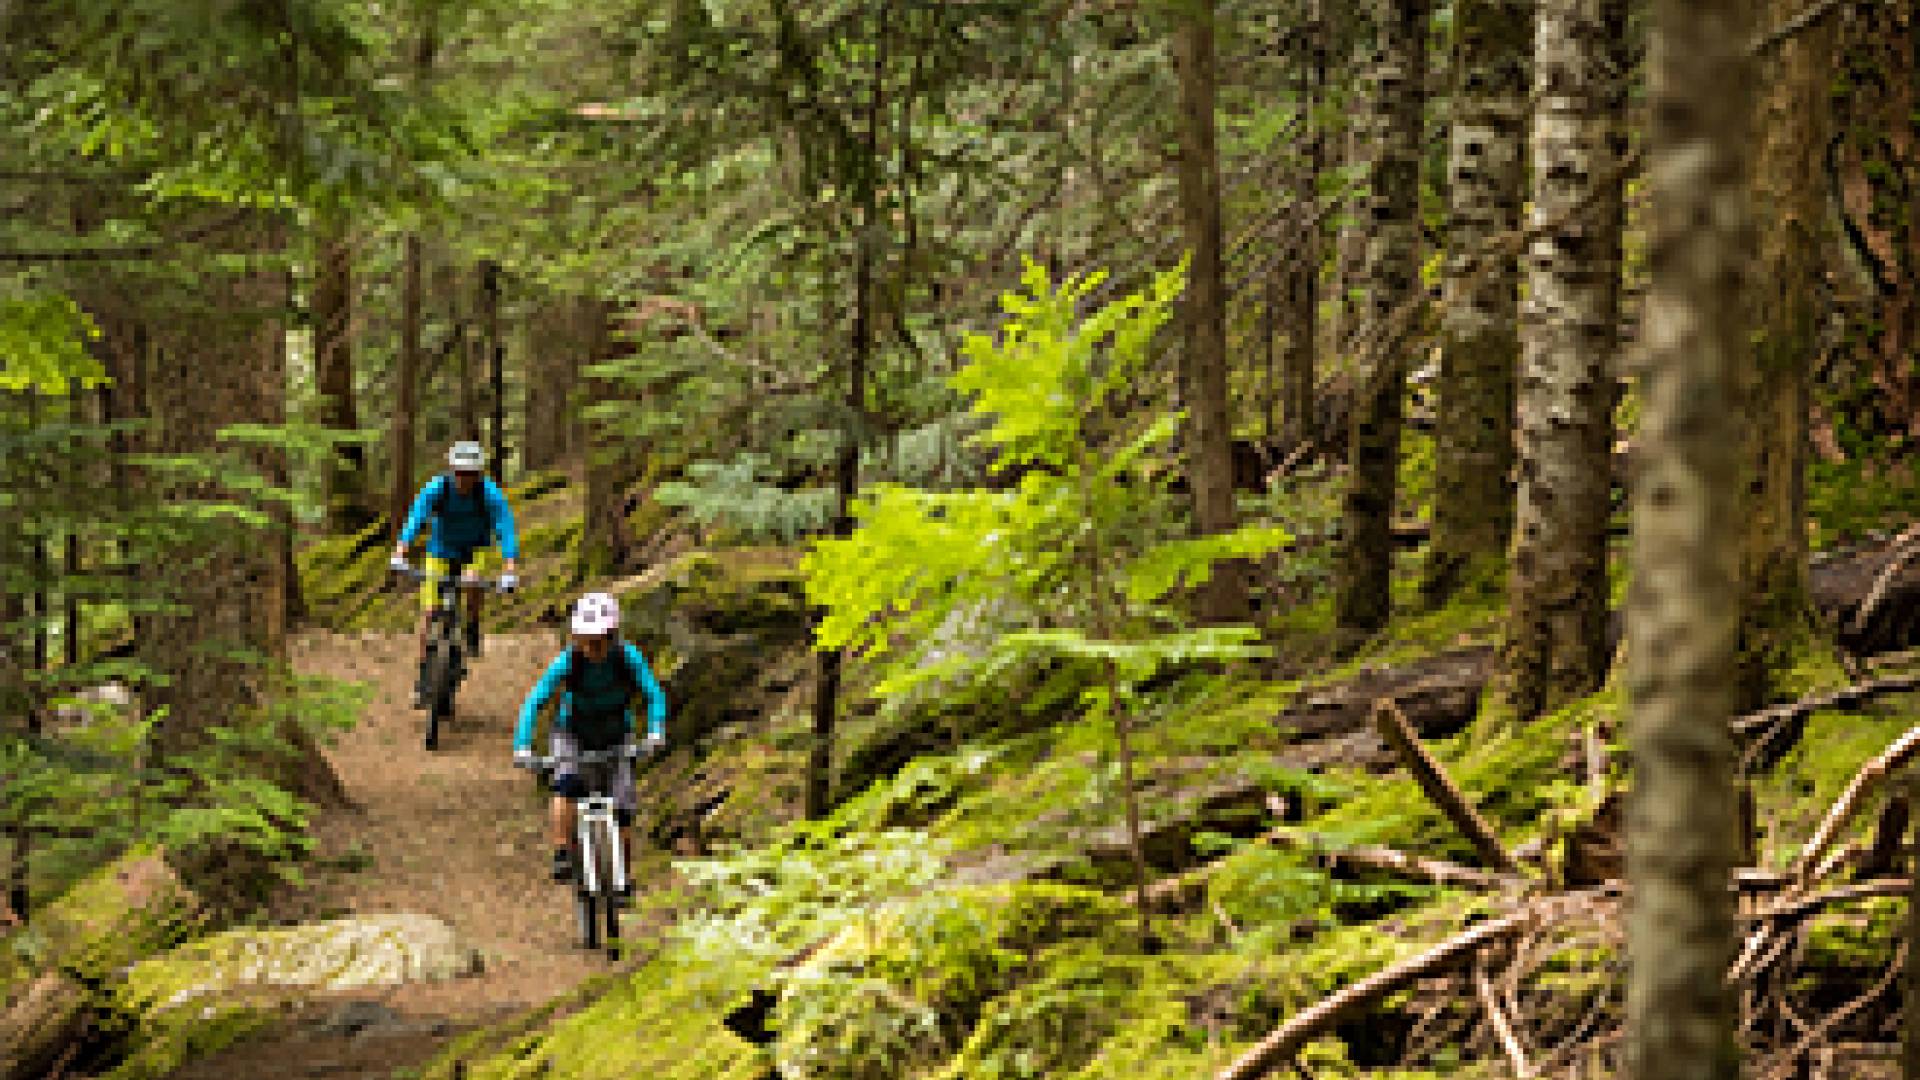 Two people biking on a trail in a forest.